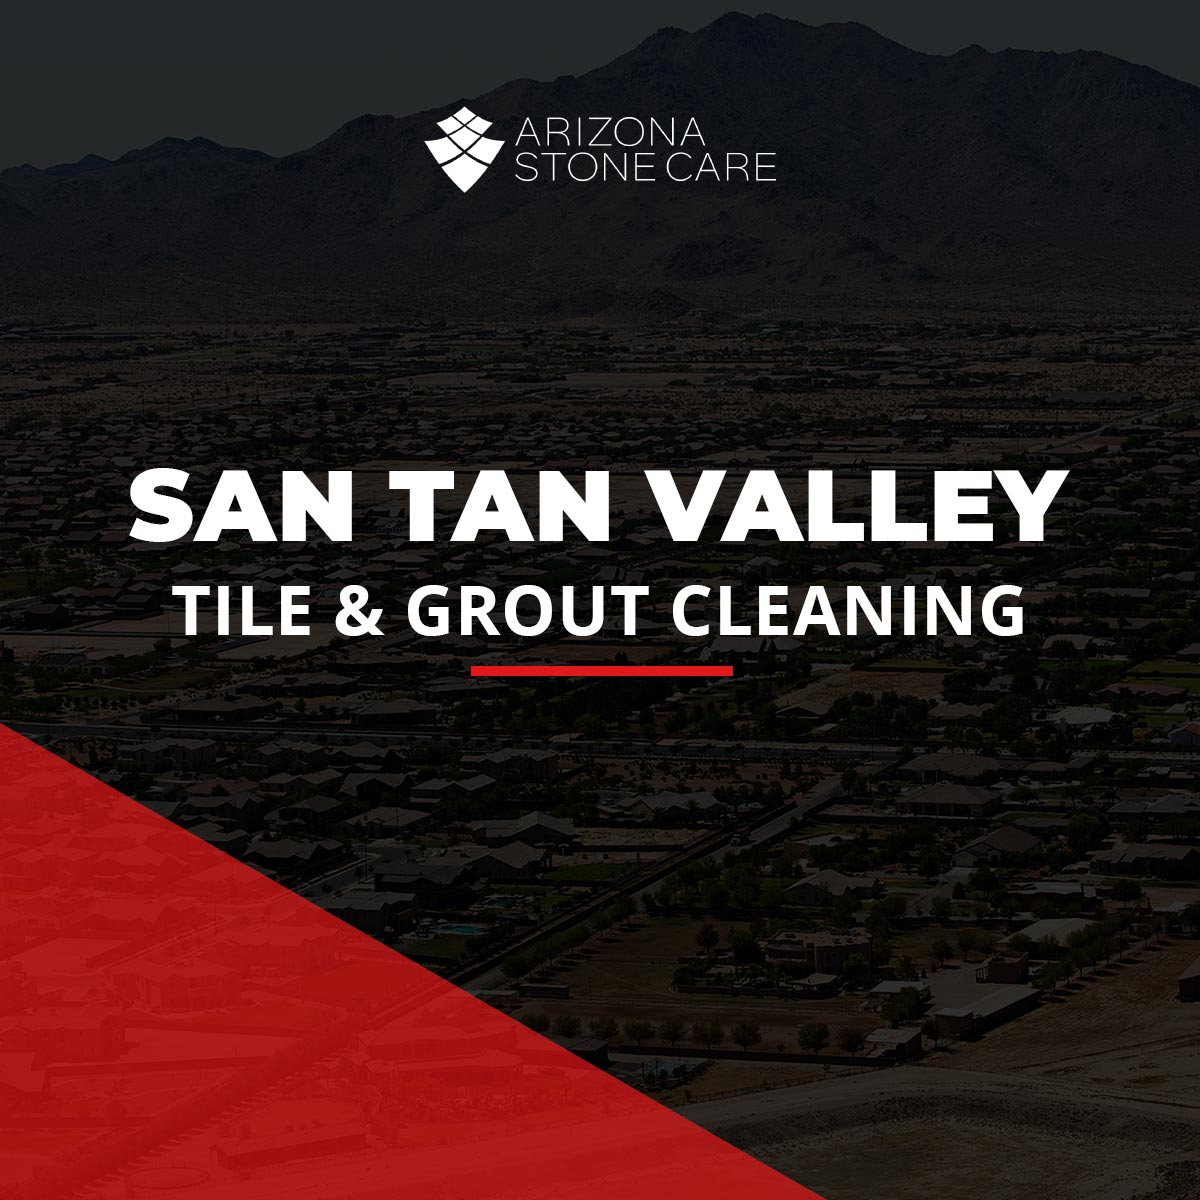 https://arizonastonecare.com/wp-content/uploads/2021/03/san-tan-valley-tile-and-grout-cleaning-arizona-stone-care.jpg